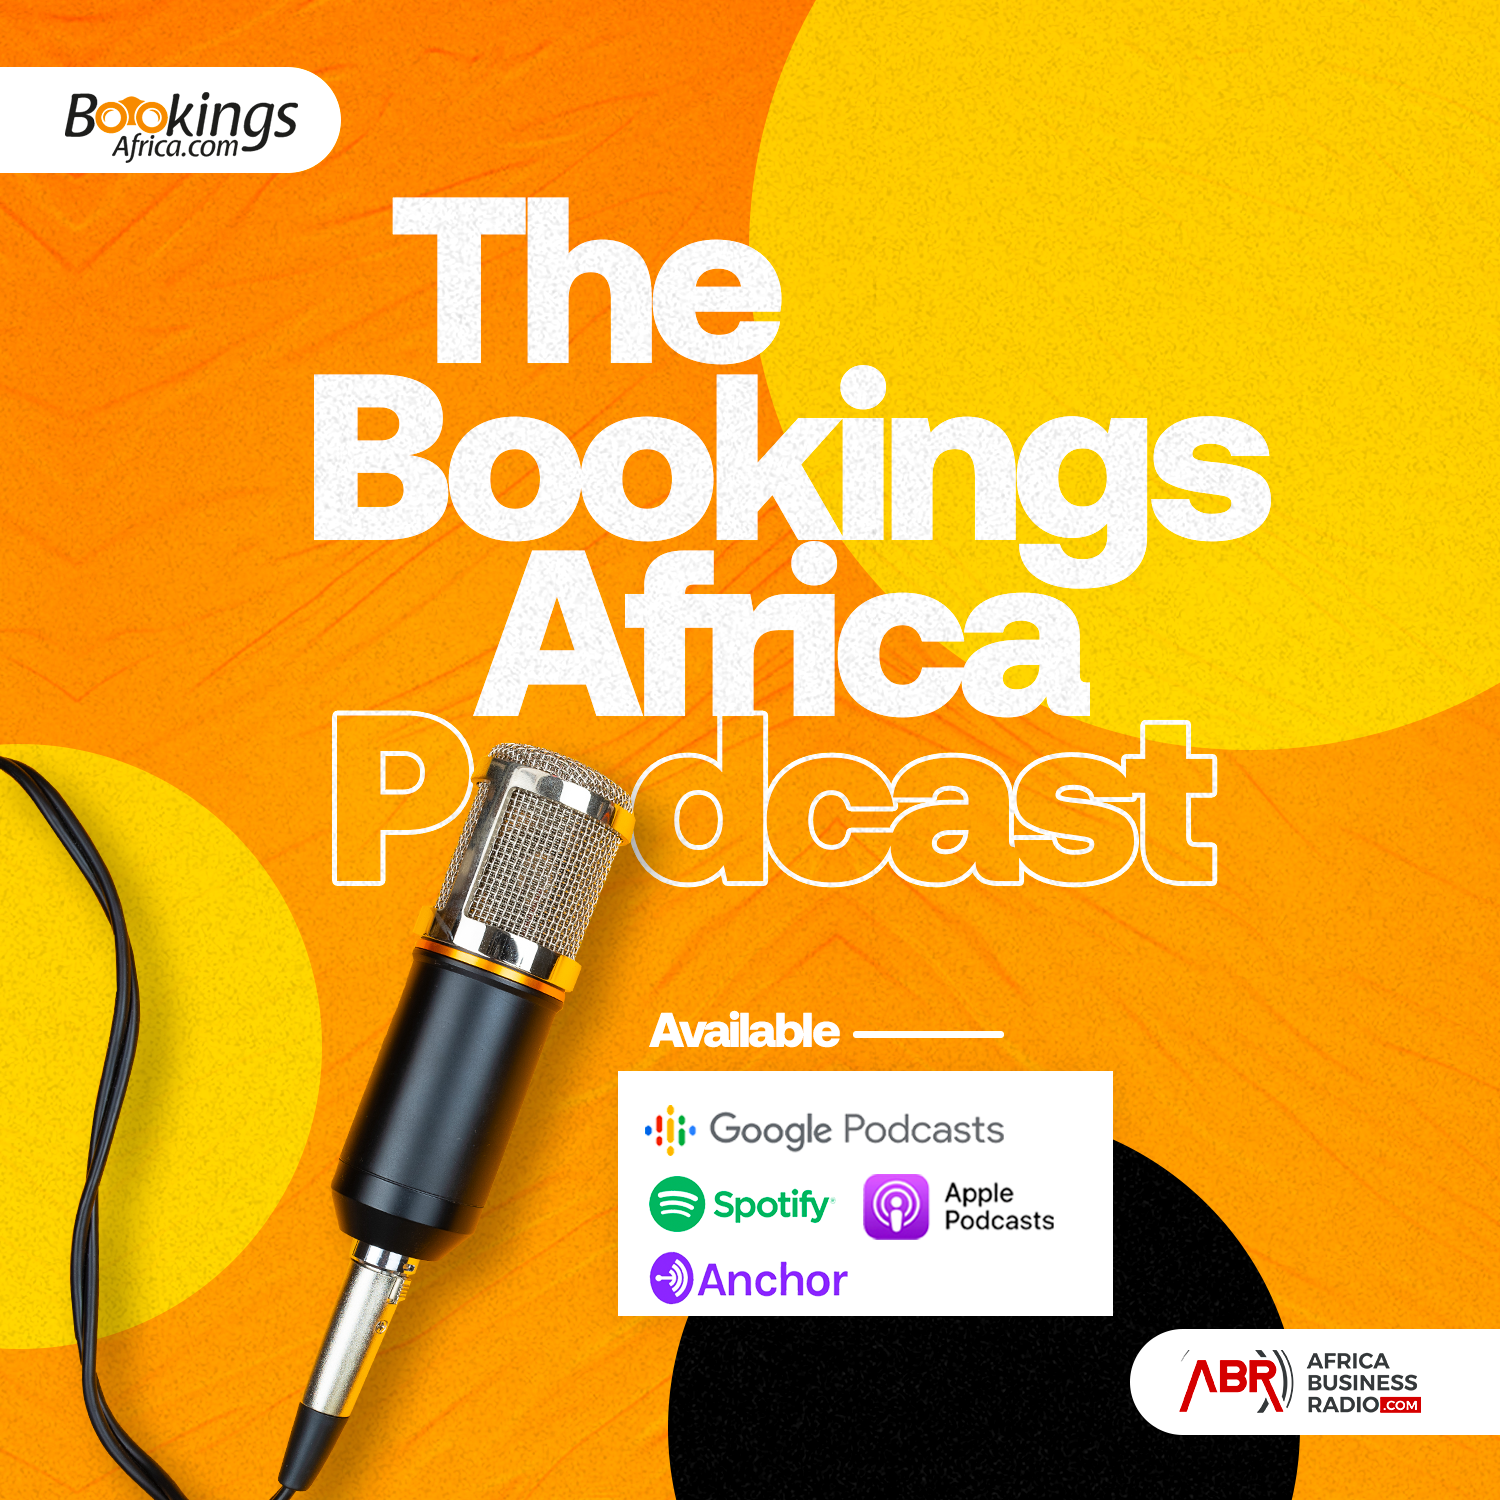 Bookings Africa Podcast